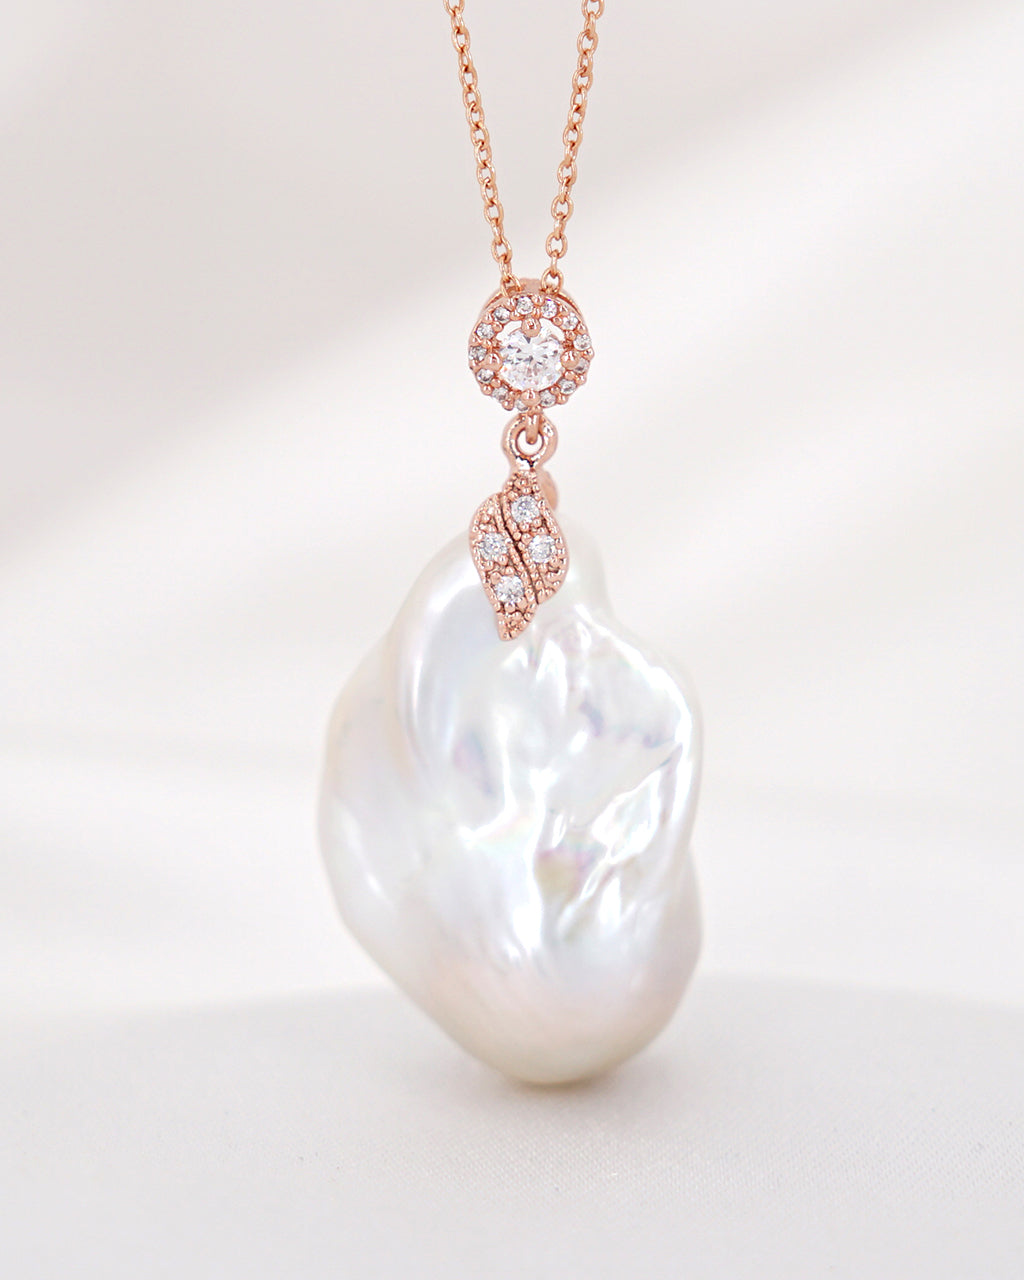 Baroque Pearl Pendant Rose Gold Necklace - White - Wedding Bridal Jewelry for Brides and Bridesmaids | Singapore